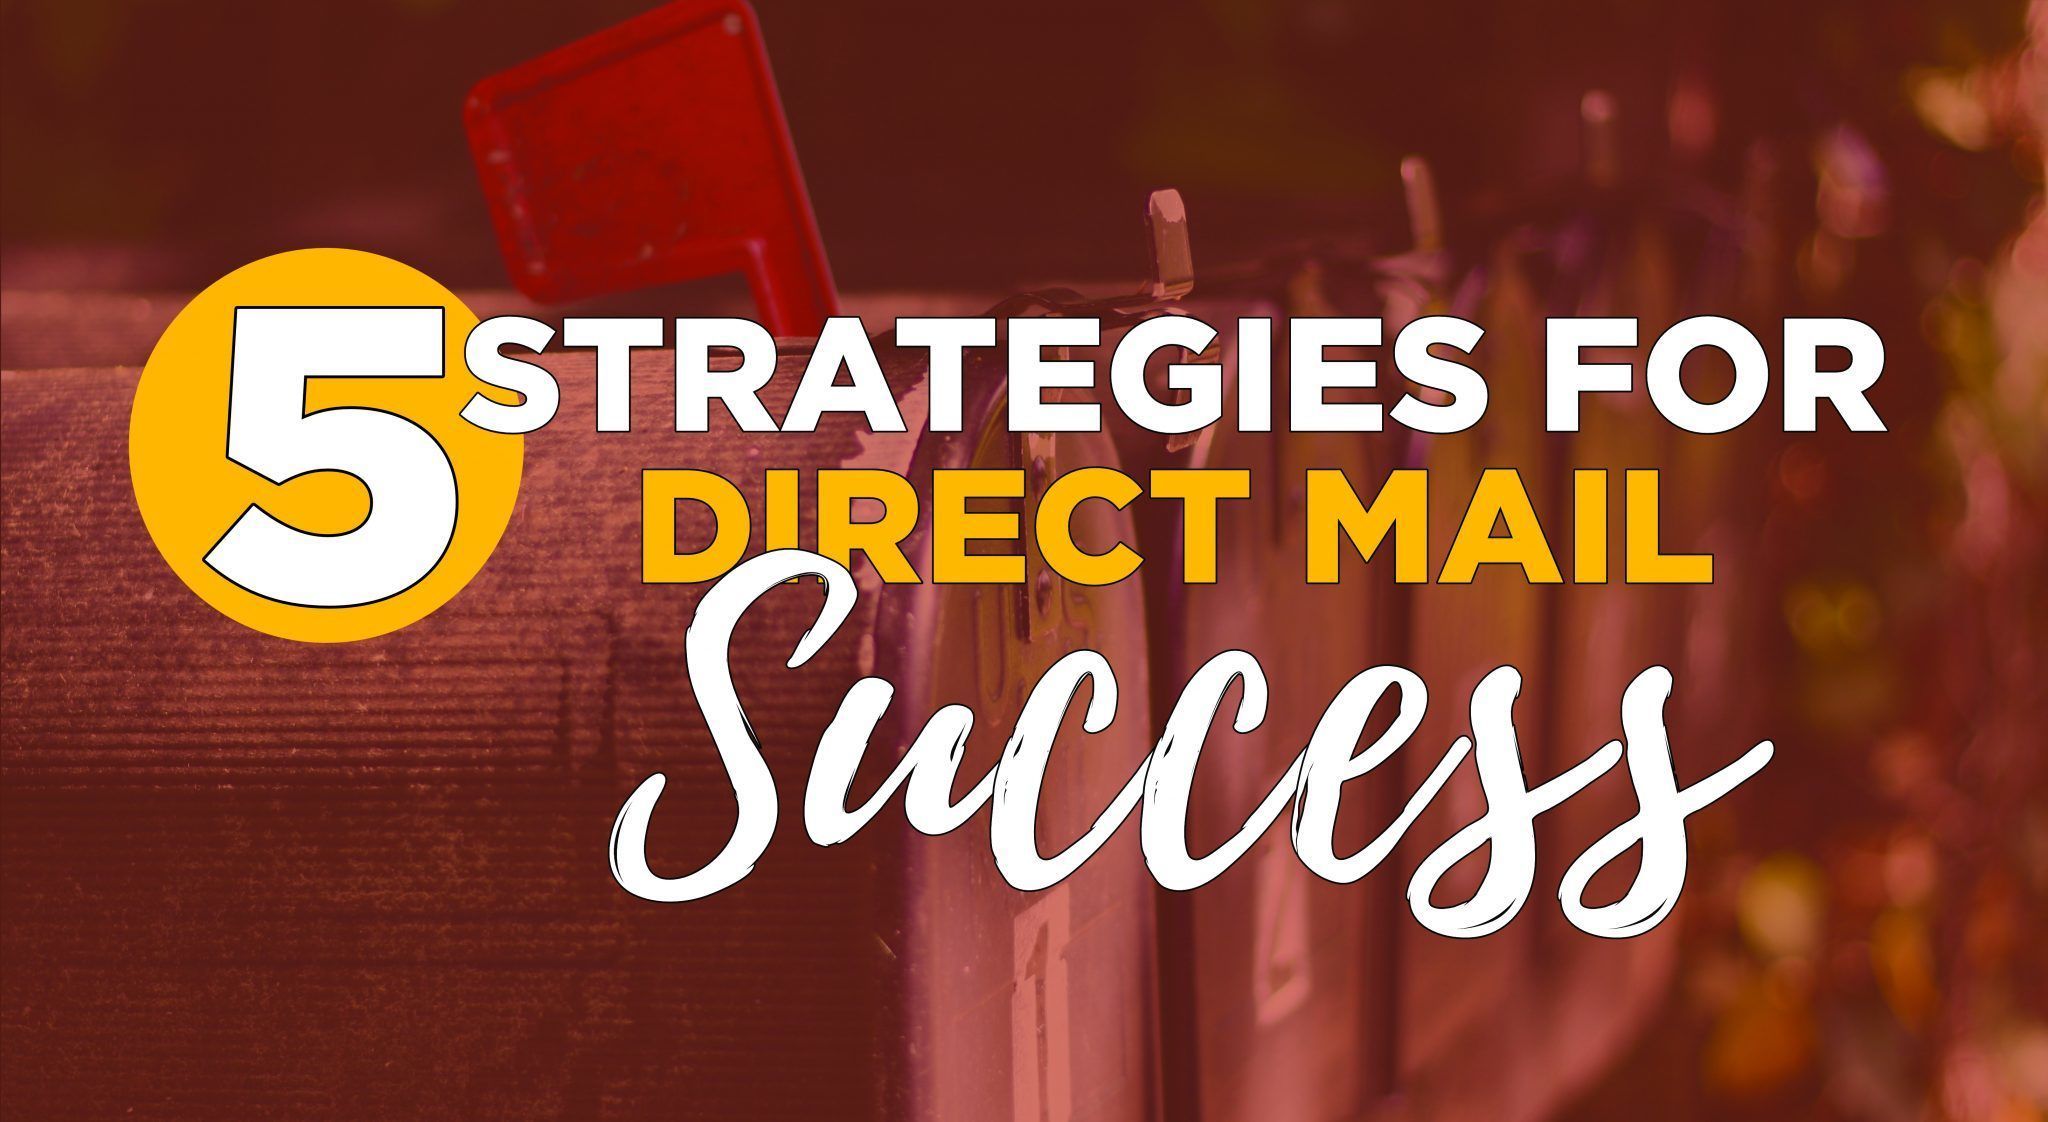 5 Strategies for Direct Mail Success